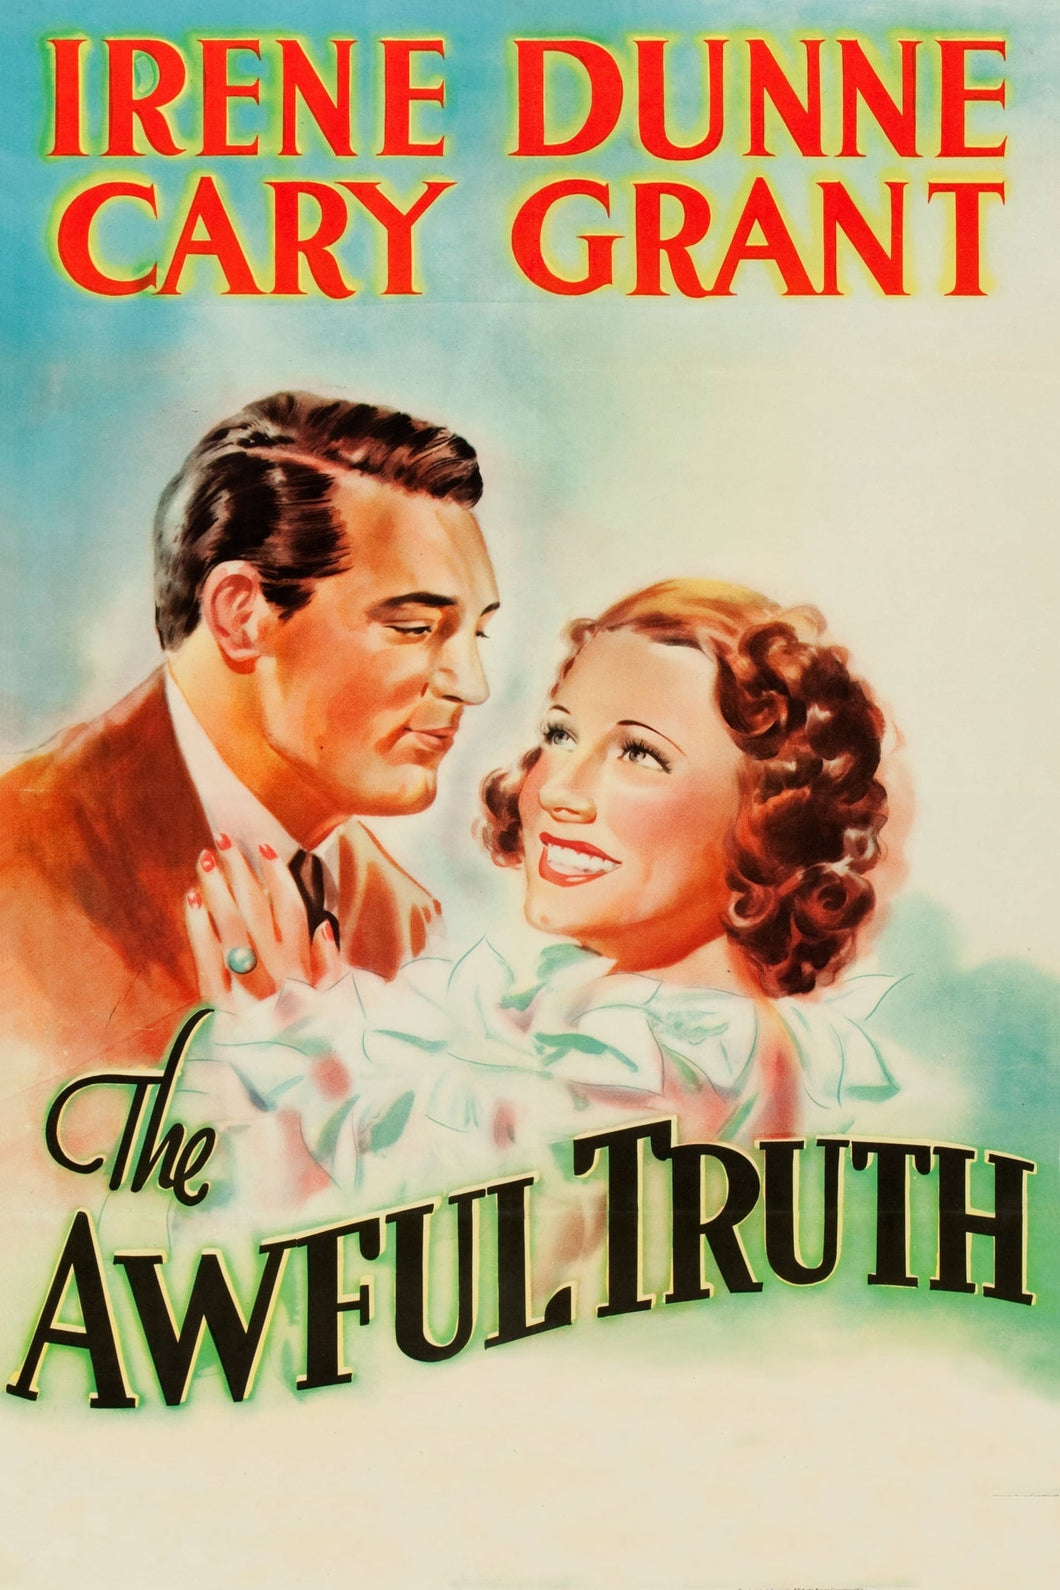 The Awful Truth (1937) Movie Poster High Quality Glossy Paper A1 A2 A3 A4 A3 Framed or Unframed!!